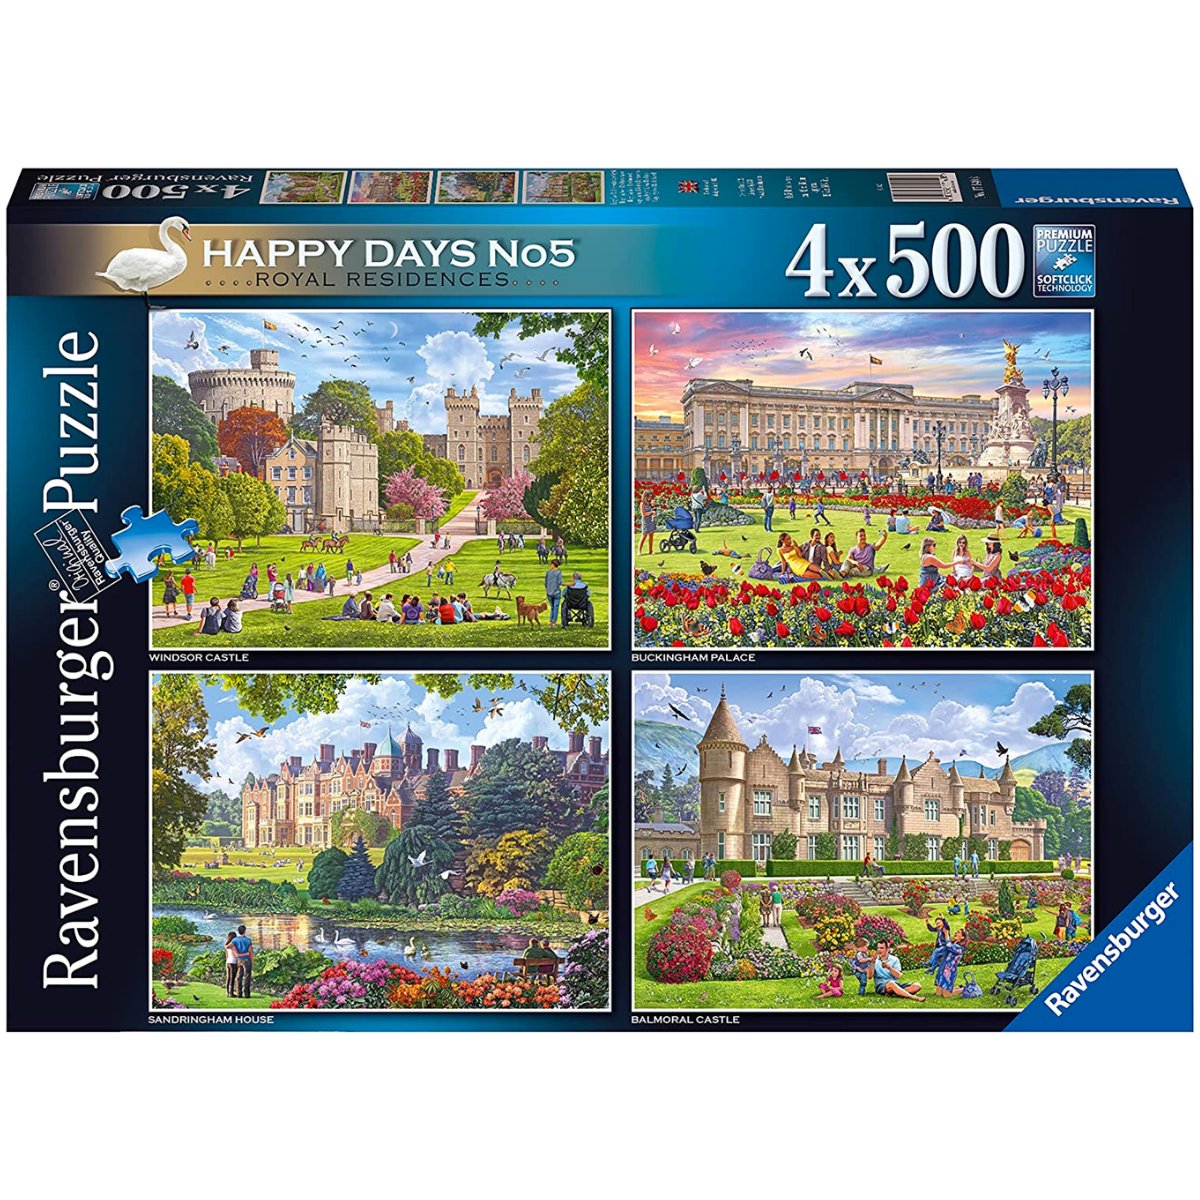 Ravensburger Happy Days No.5 Royal Residences - 4x 500 Piece Jigsaw Puzzle - Phillips Hobbies